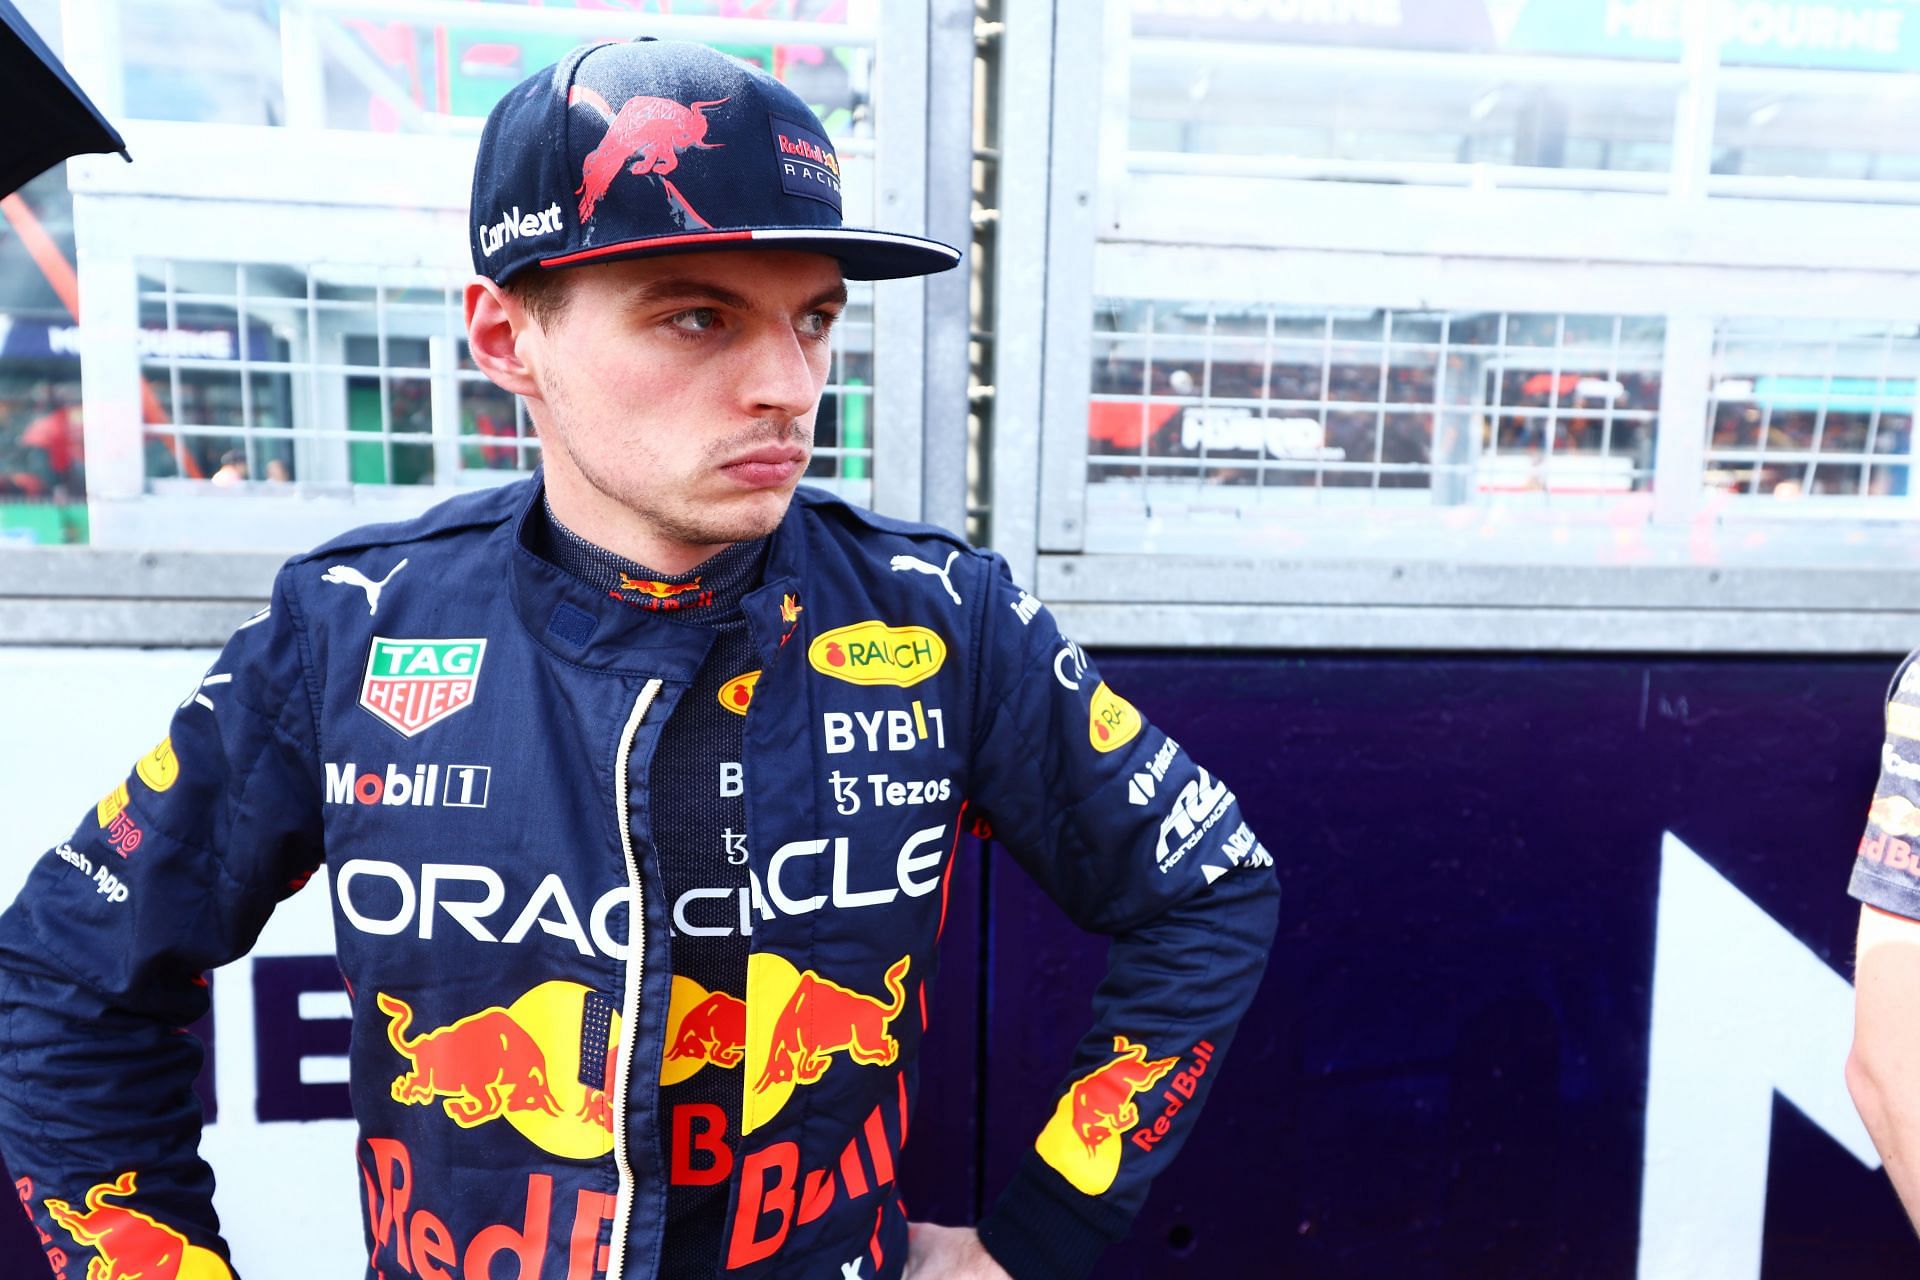 Max Verstappen has lost 36 points due to reliability issues in the first three races of the 2022 F1 season. (Photo by Mark Thompson/Getty Images)